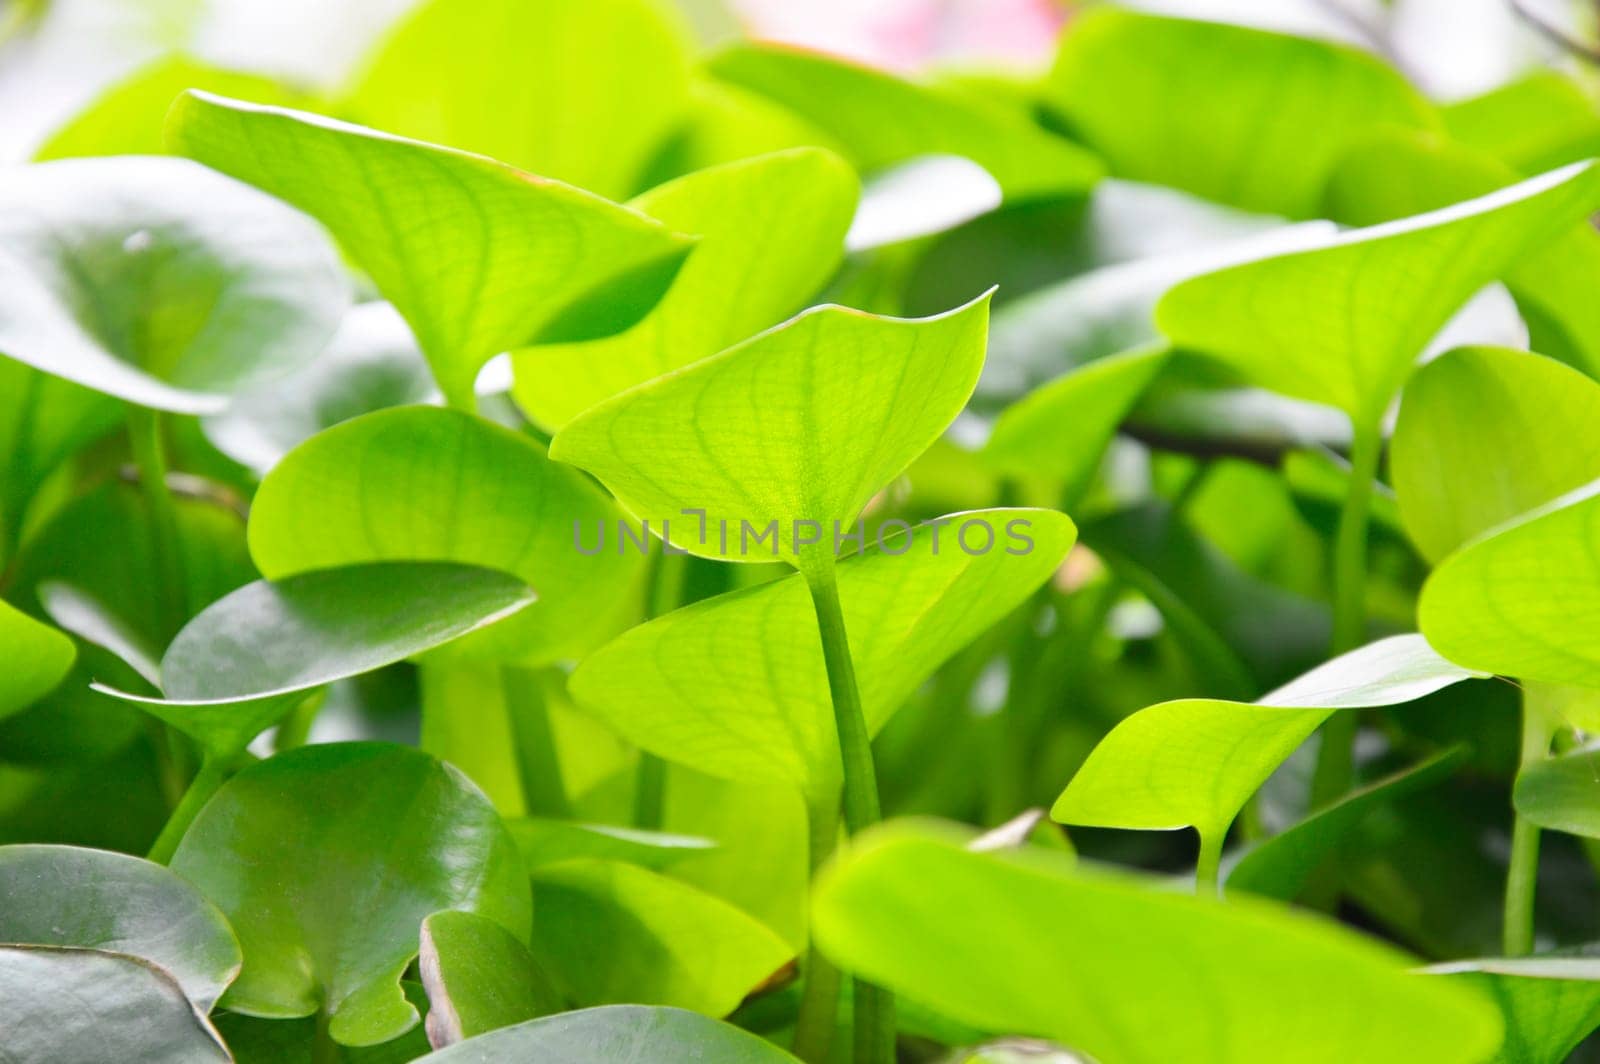 The young leaves of the lotus leaf are light green.